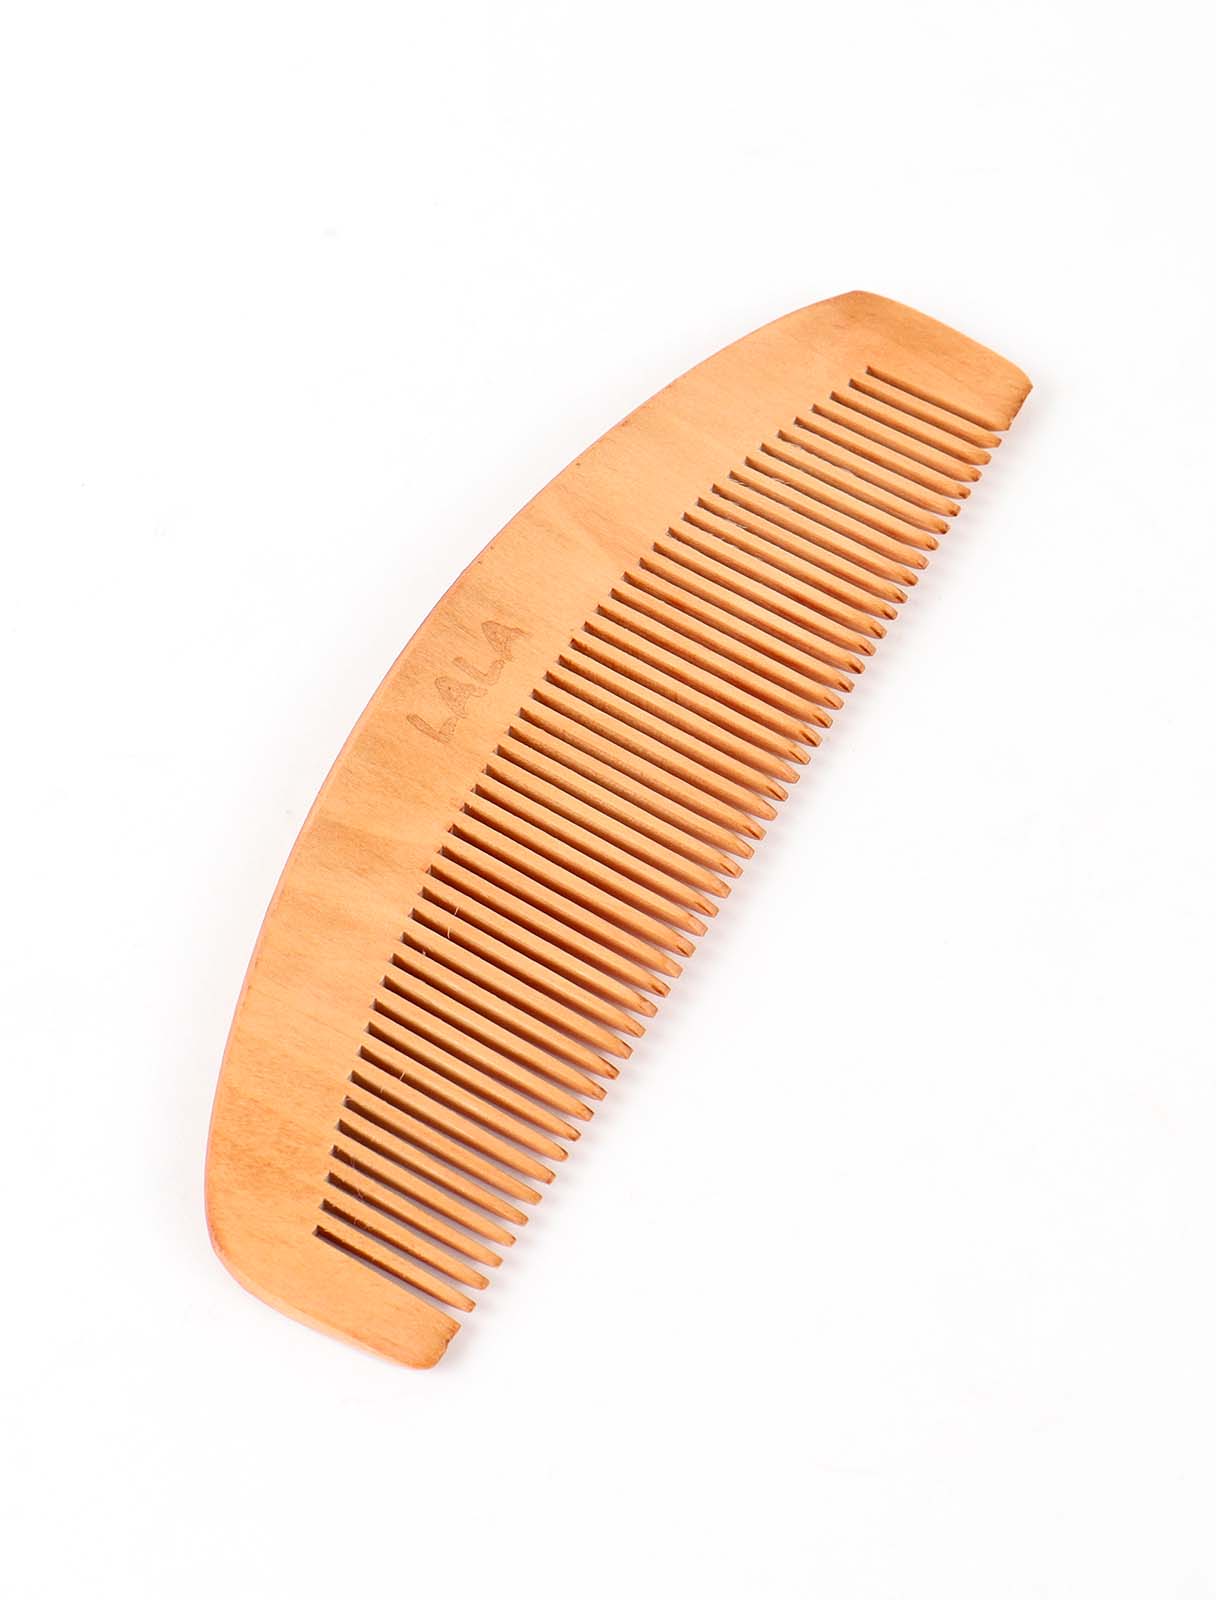 Natural wood comb with oval design